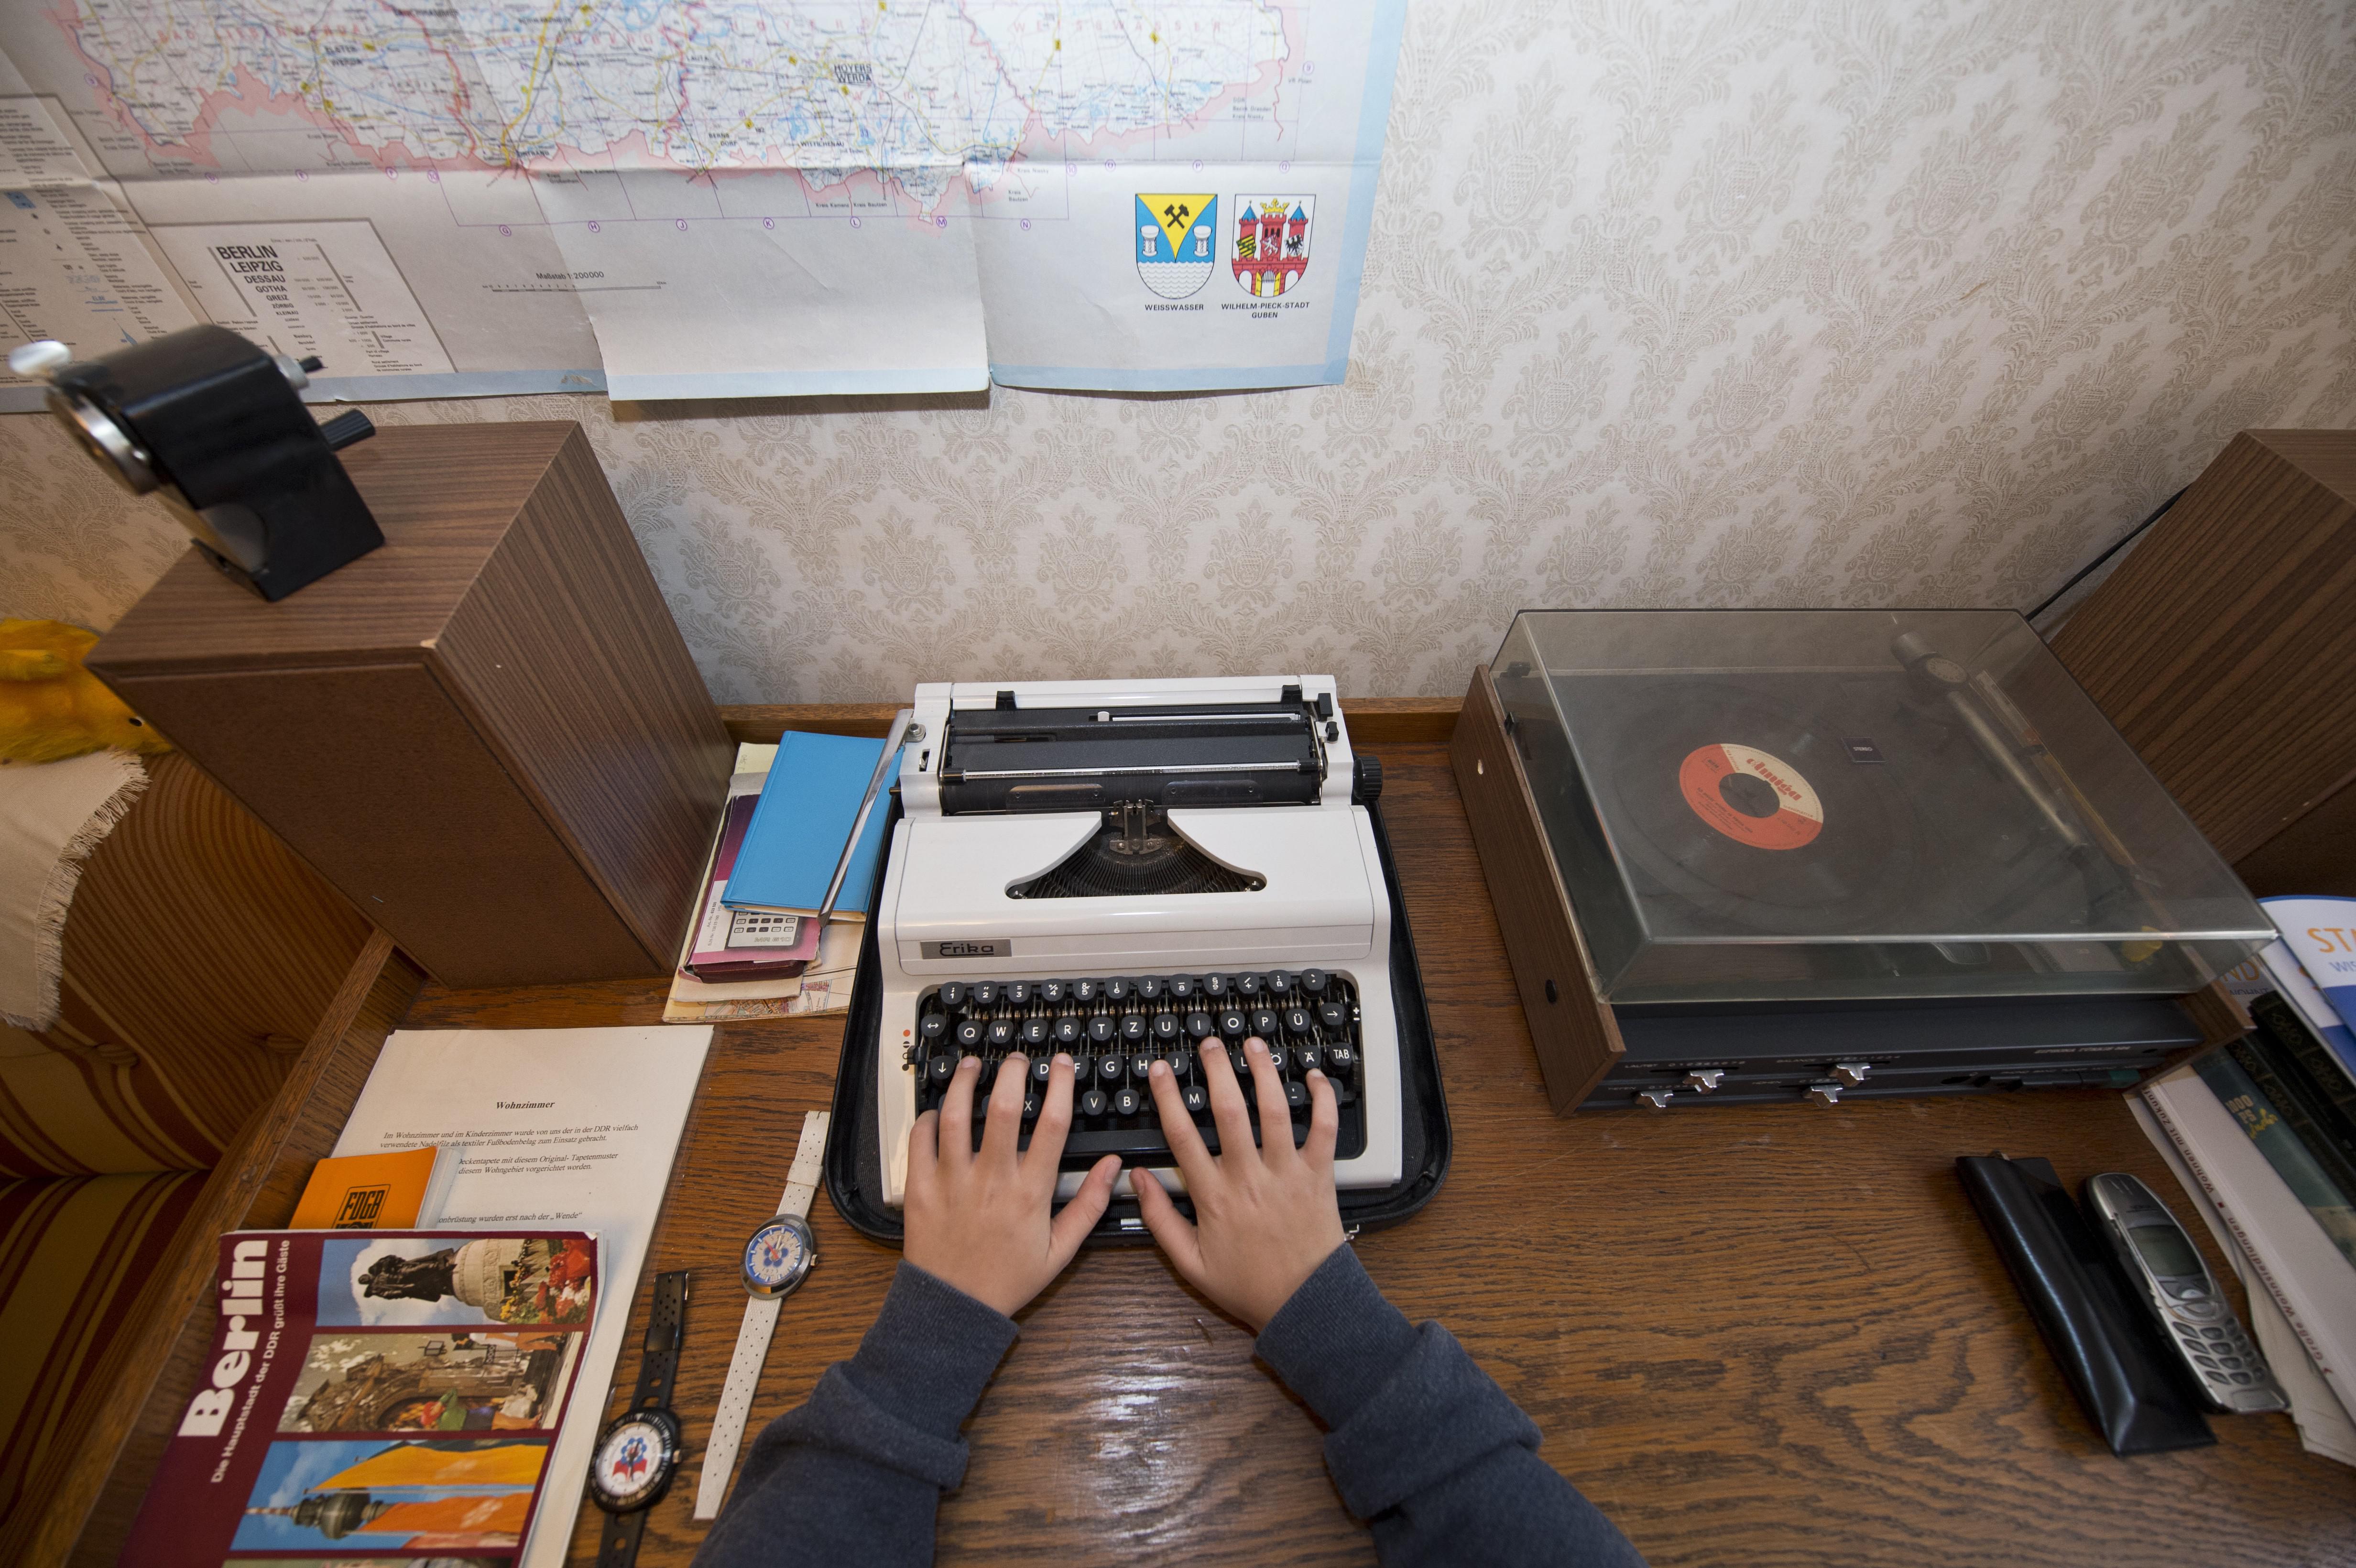 For the more whimsical, you could try writing for free on a typewriter.